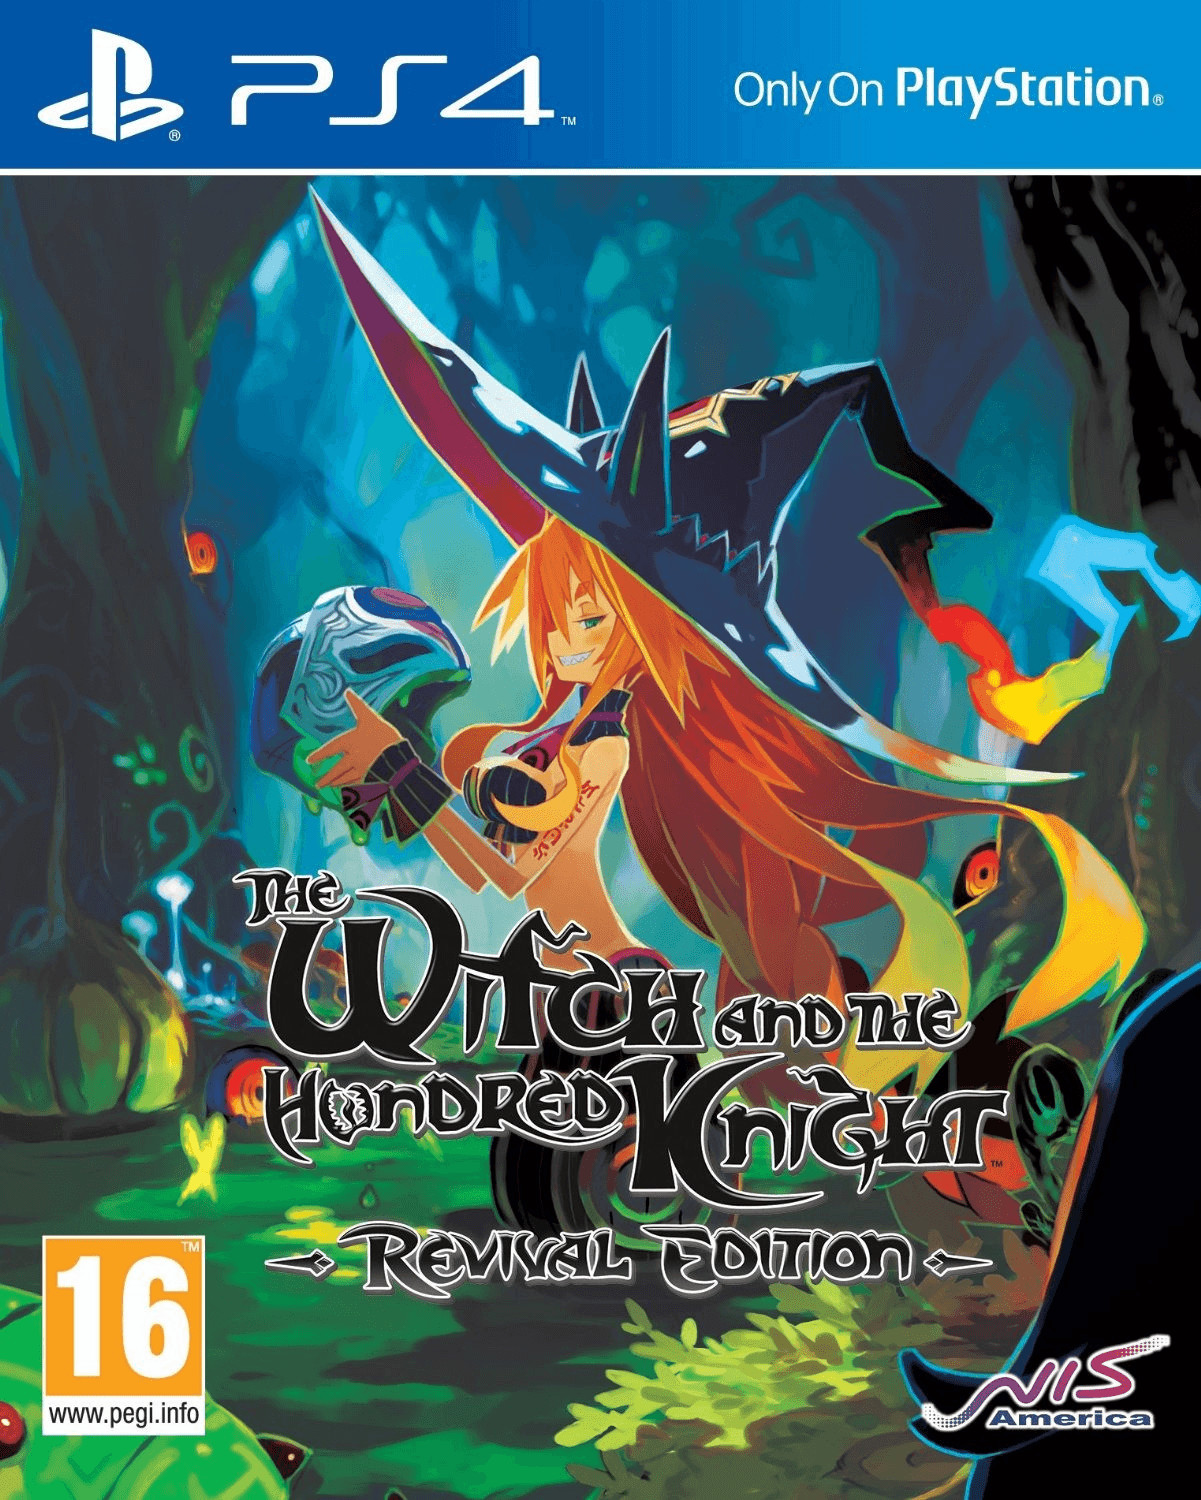 Photos - Game NIS America The Witch and the Hundred Knight: Revival Edition (PS4)